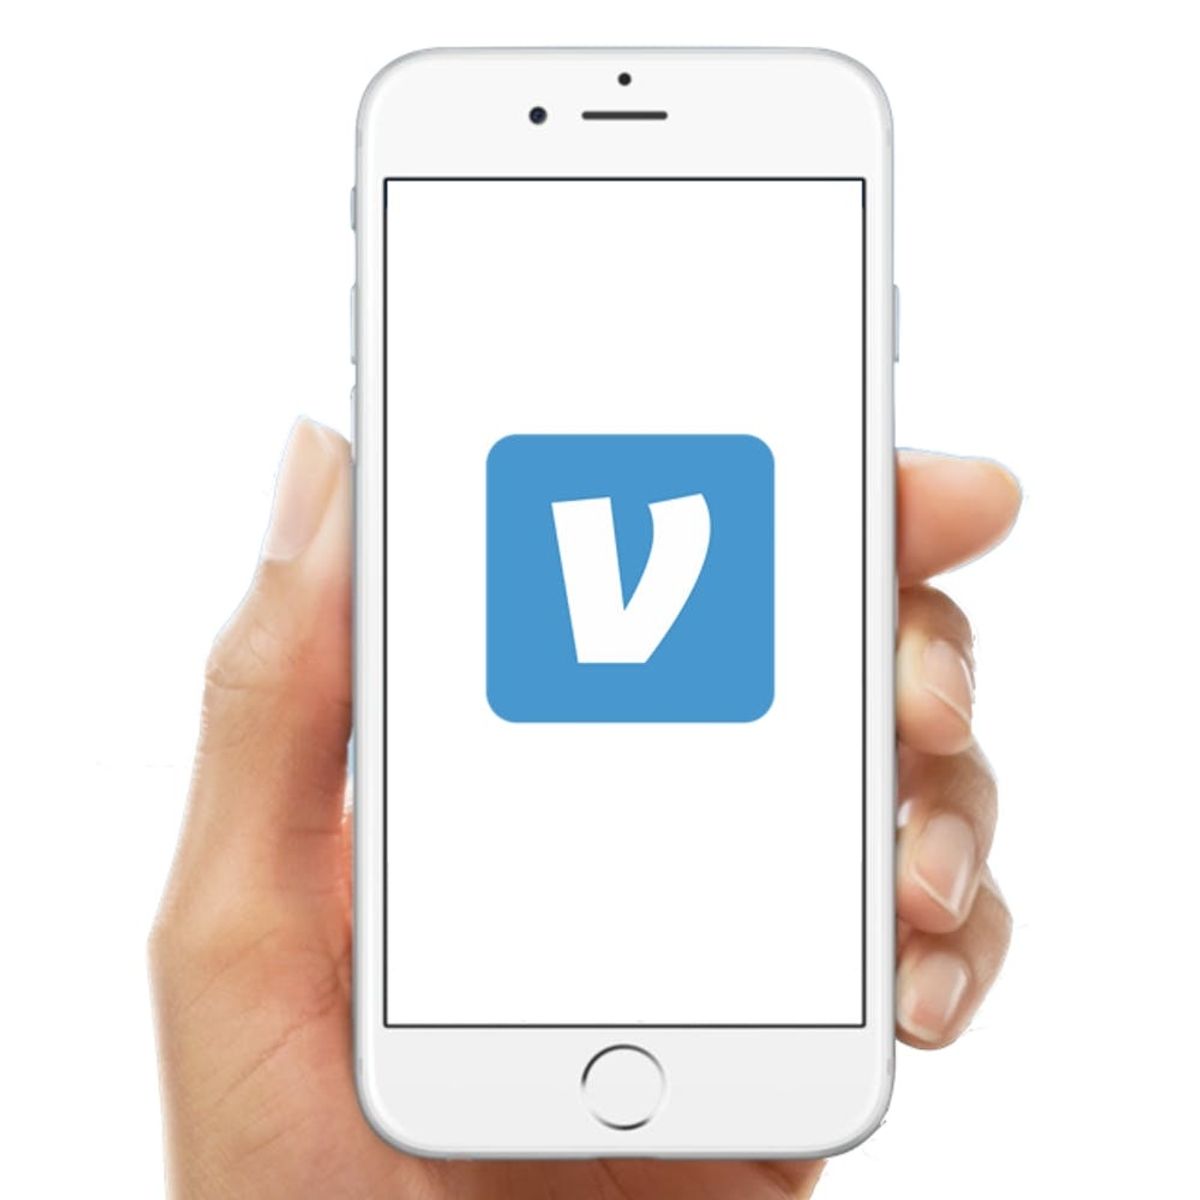 Venmo Just Sealed Up a Scary Security Loophole